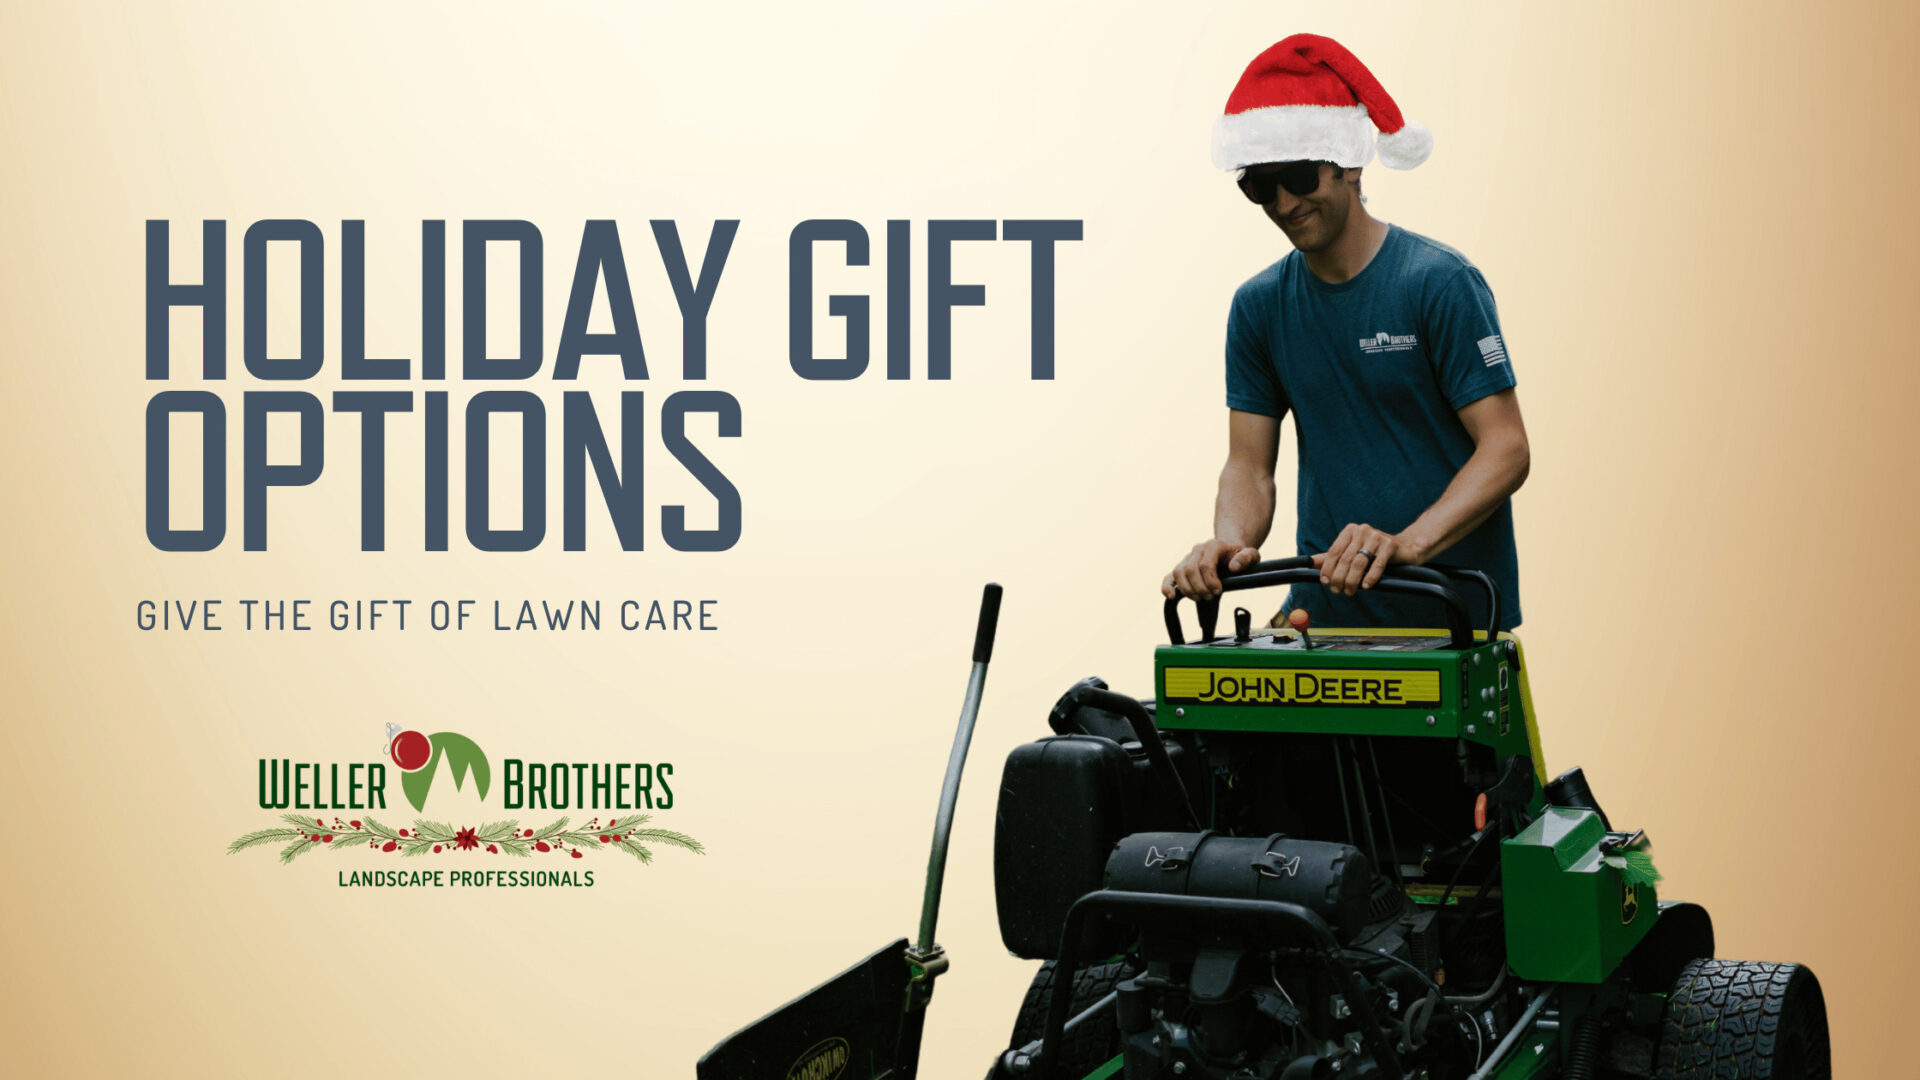 holiday lawn care gift options